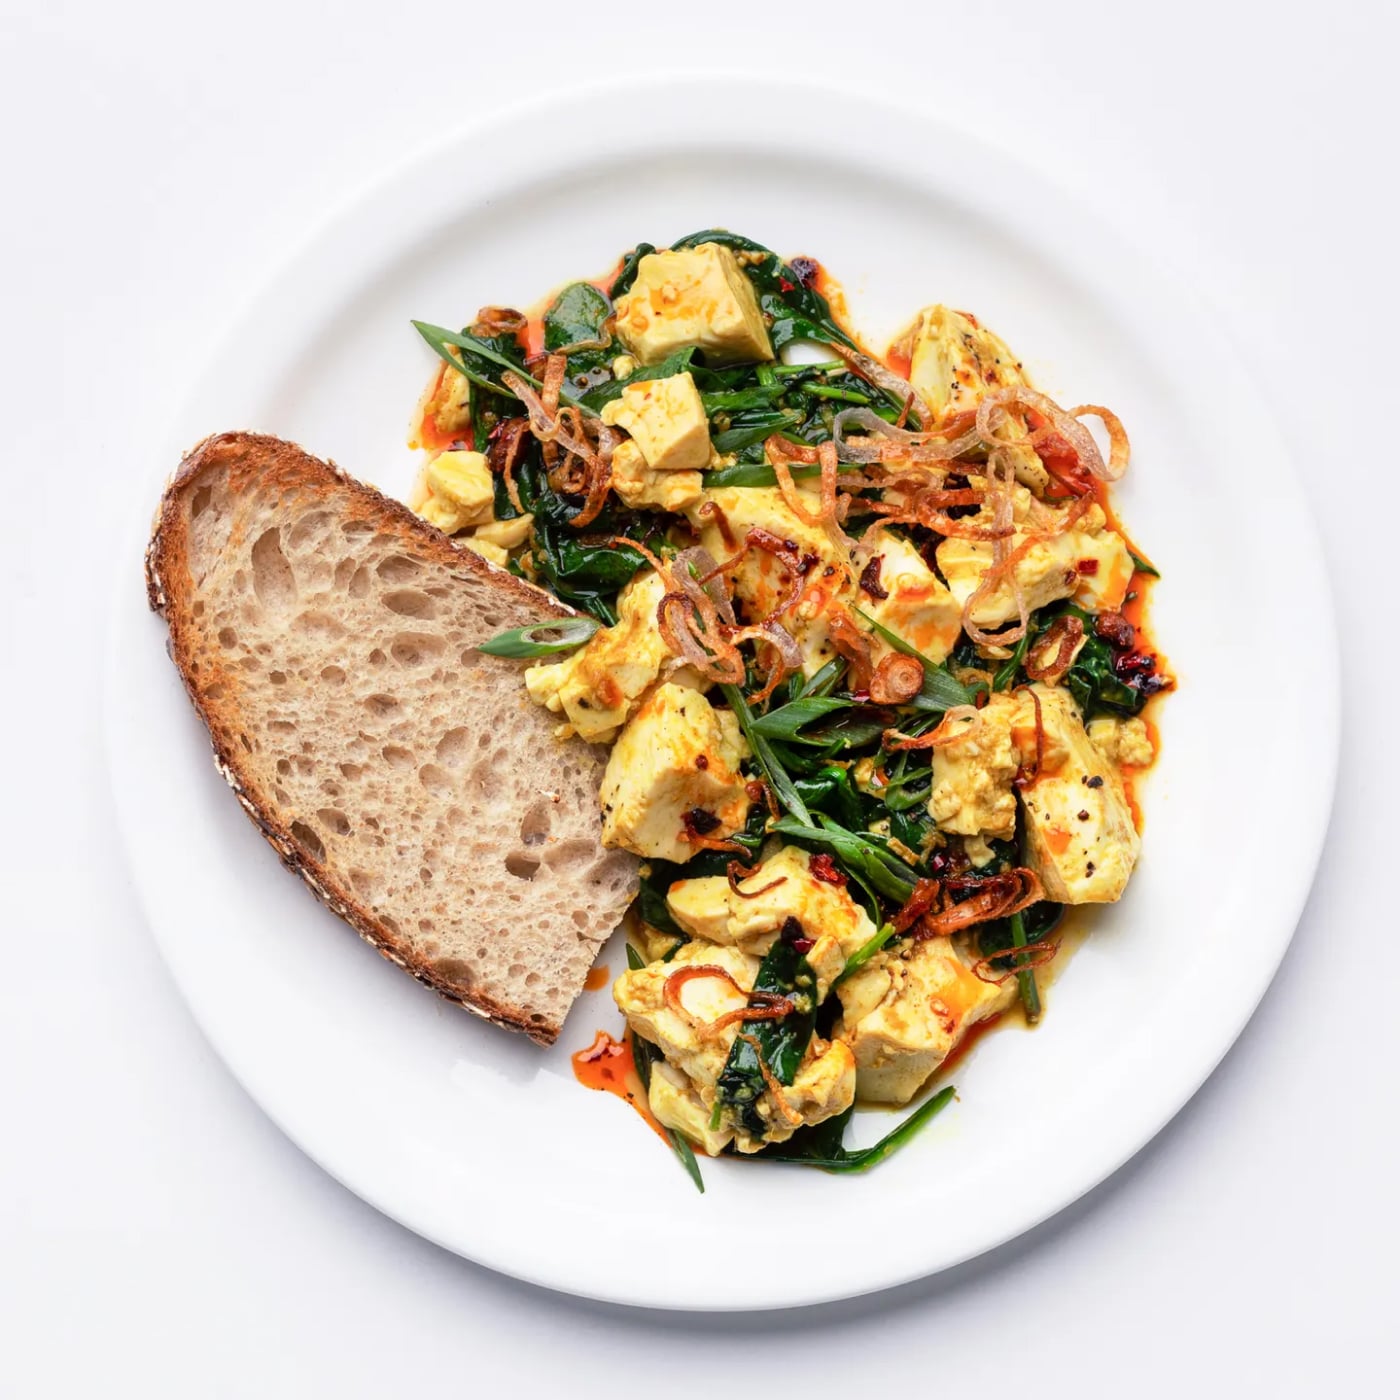 Image of Ginger-Scallion Tofu Scramble With Spinach and Chili Oil